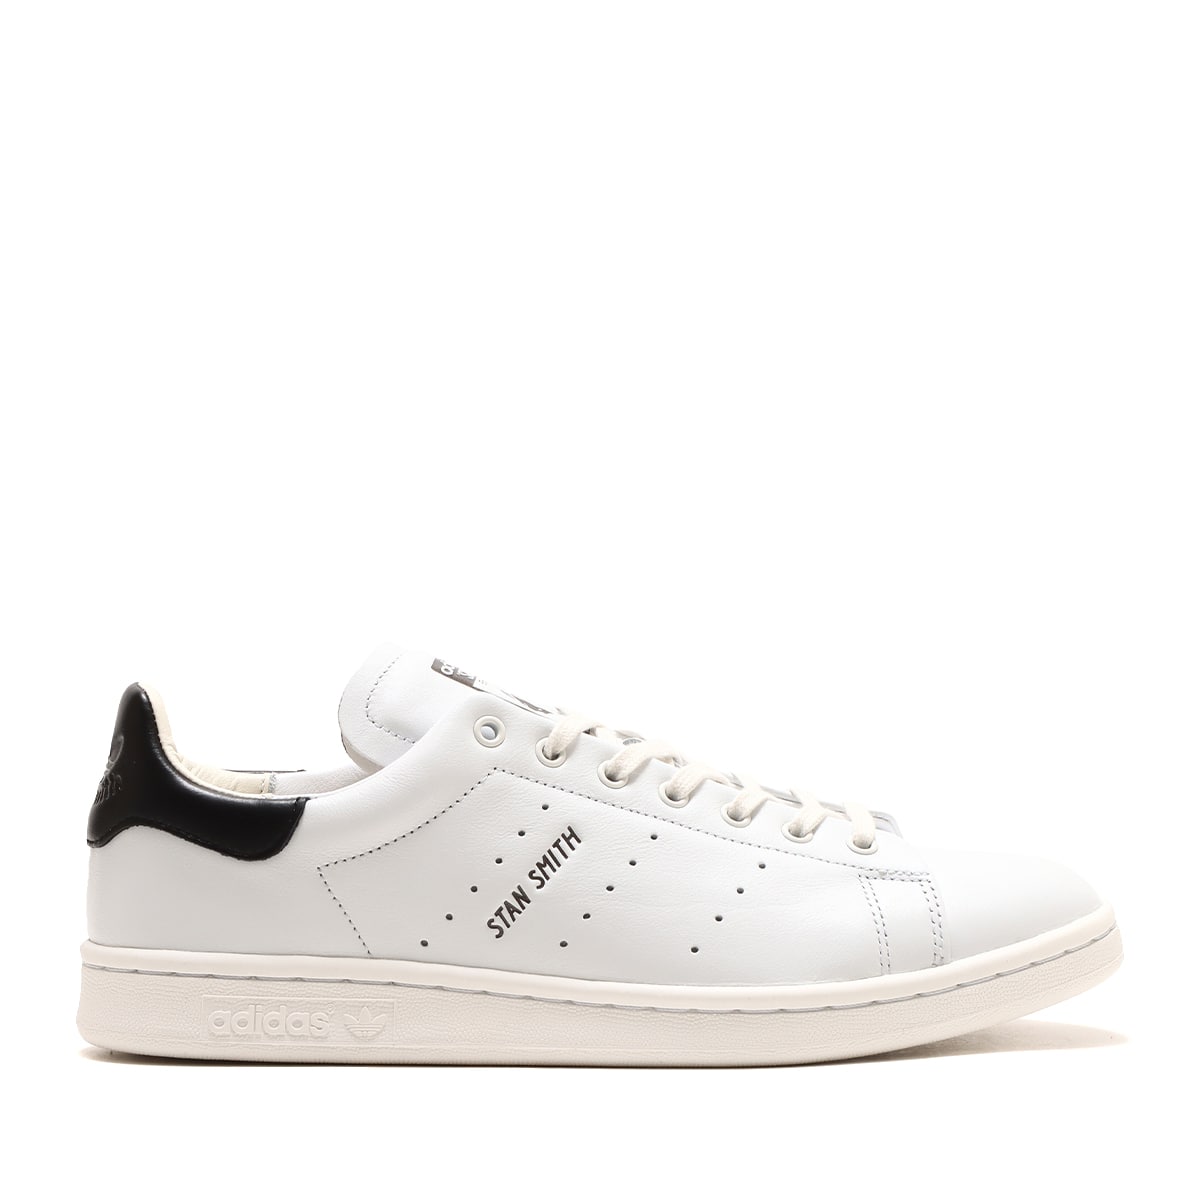 adidas STAN SMITH PURE CRYSTAL WHITE/OFF WHITE/CORE BLACK 24SS-S